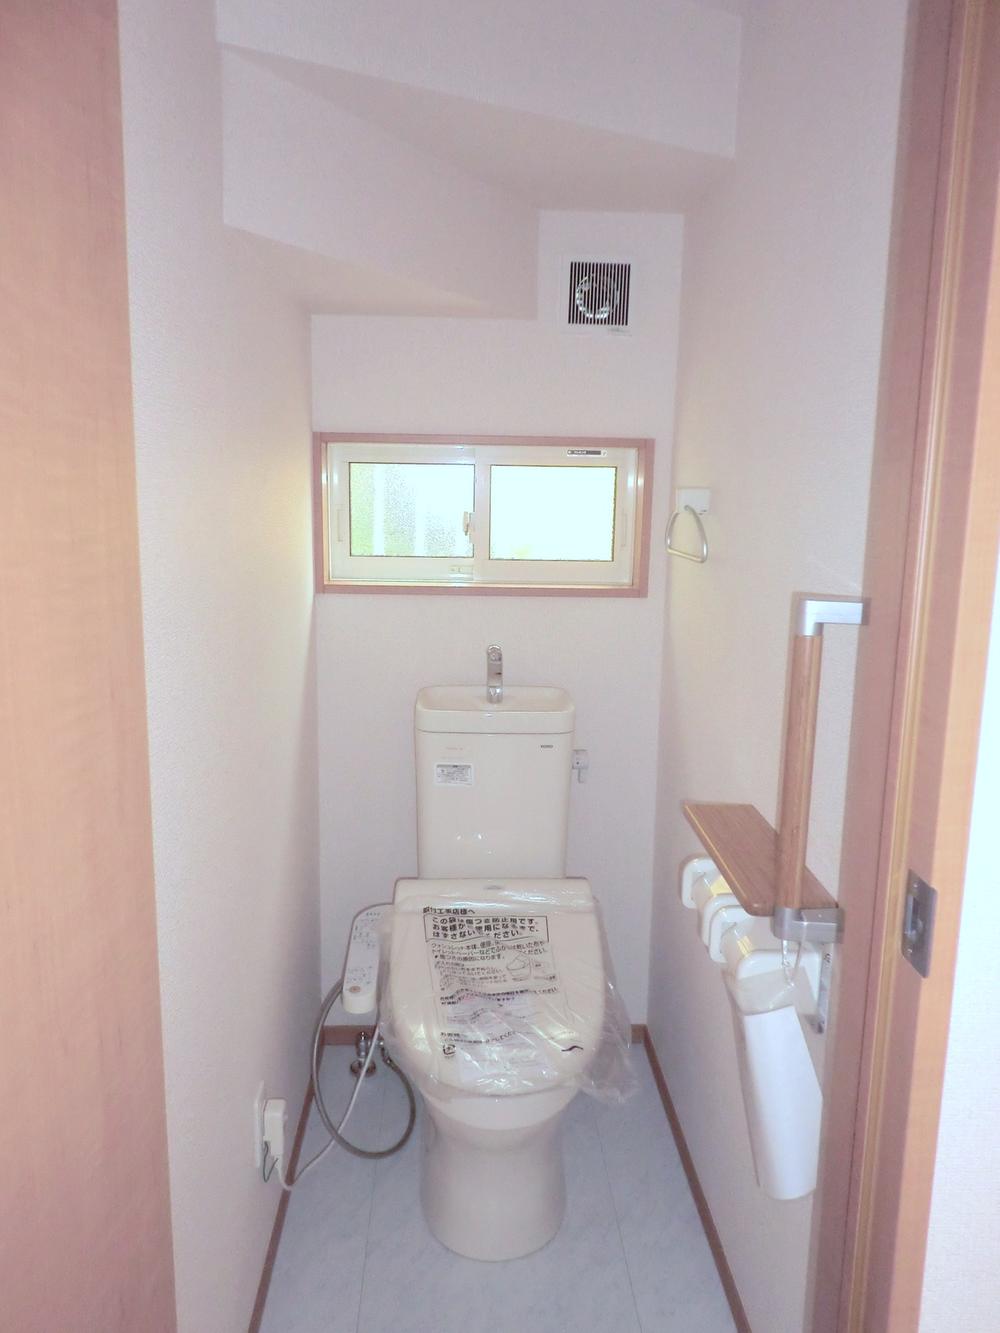 Toilet. 1, 2 Kaitomo, handrail, W cigarette machine with counter, Towel ring, It marked with, Washlet is. 